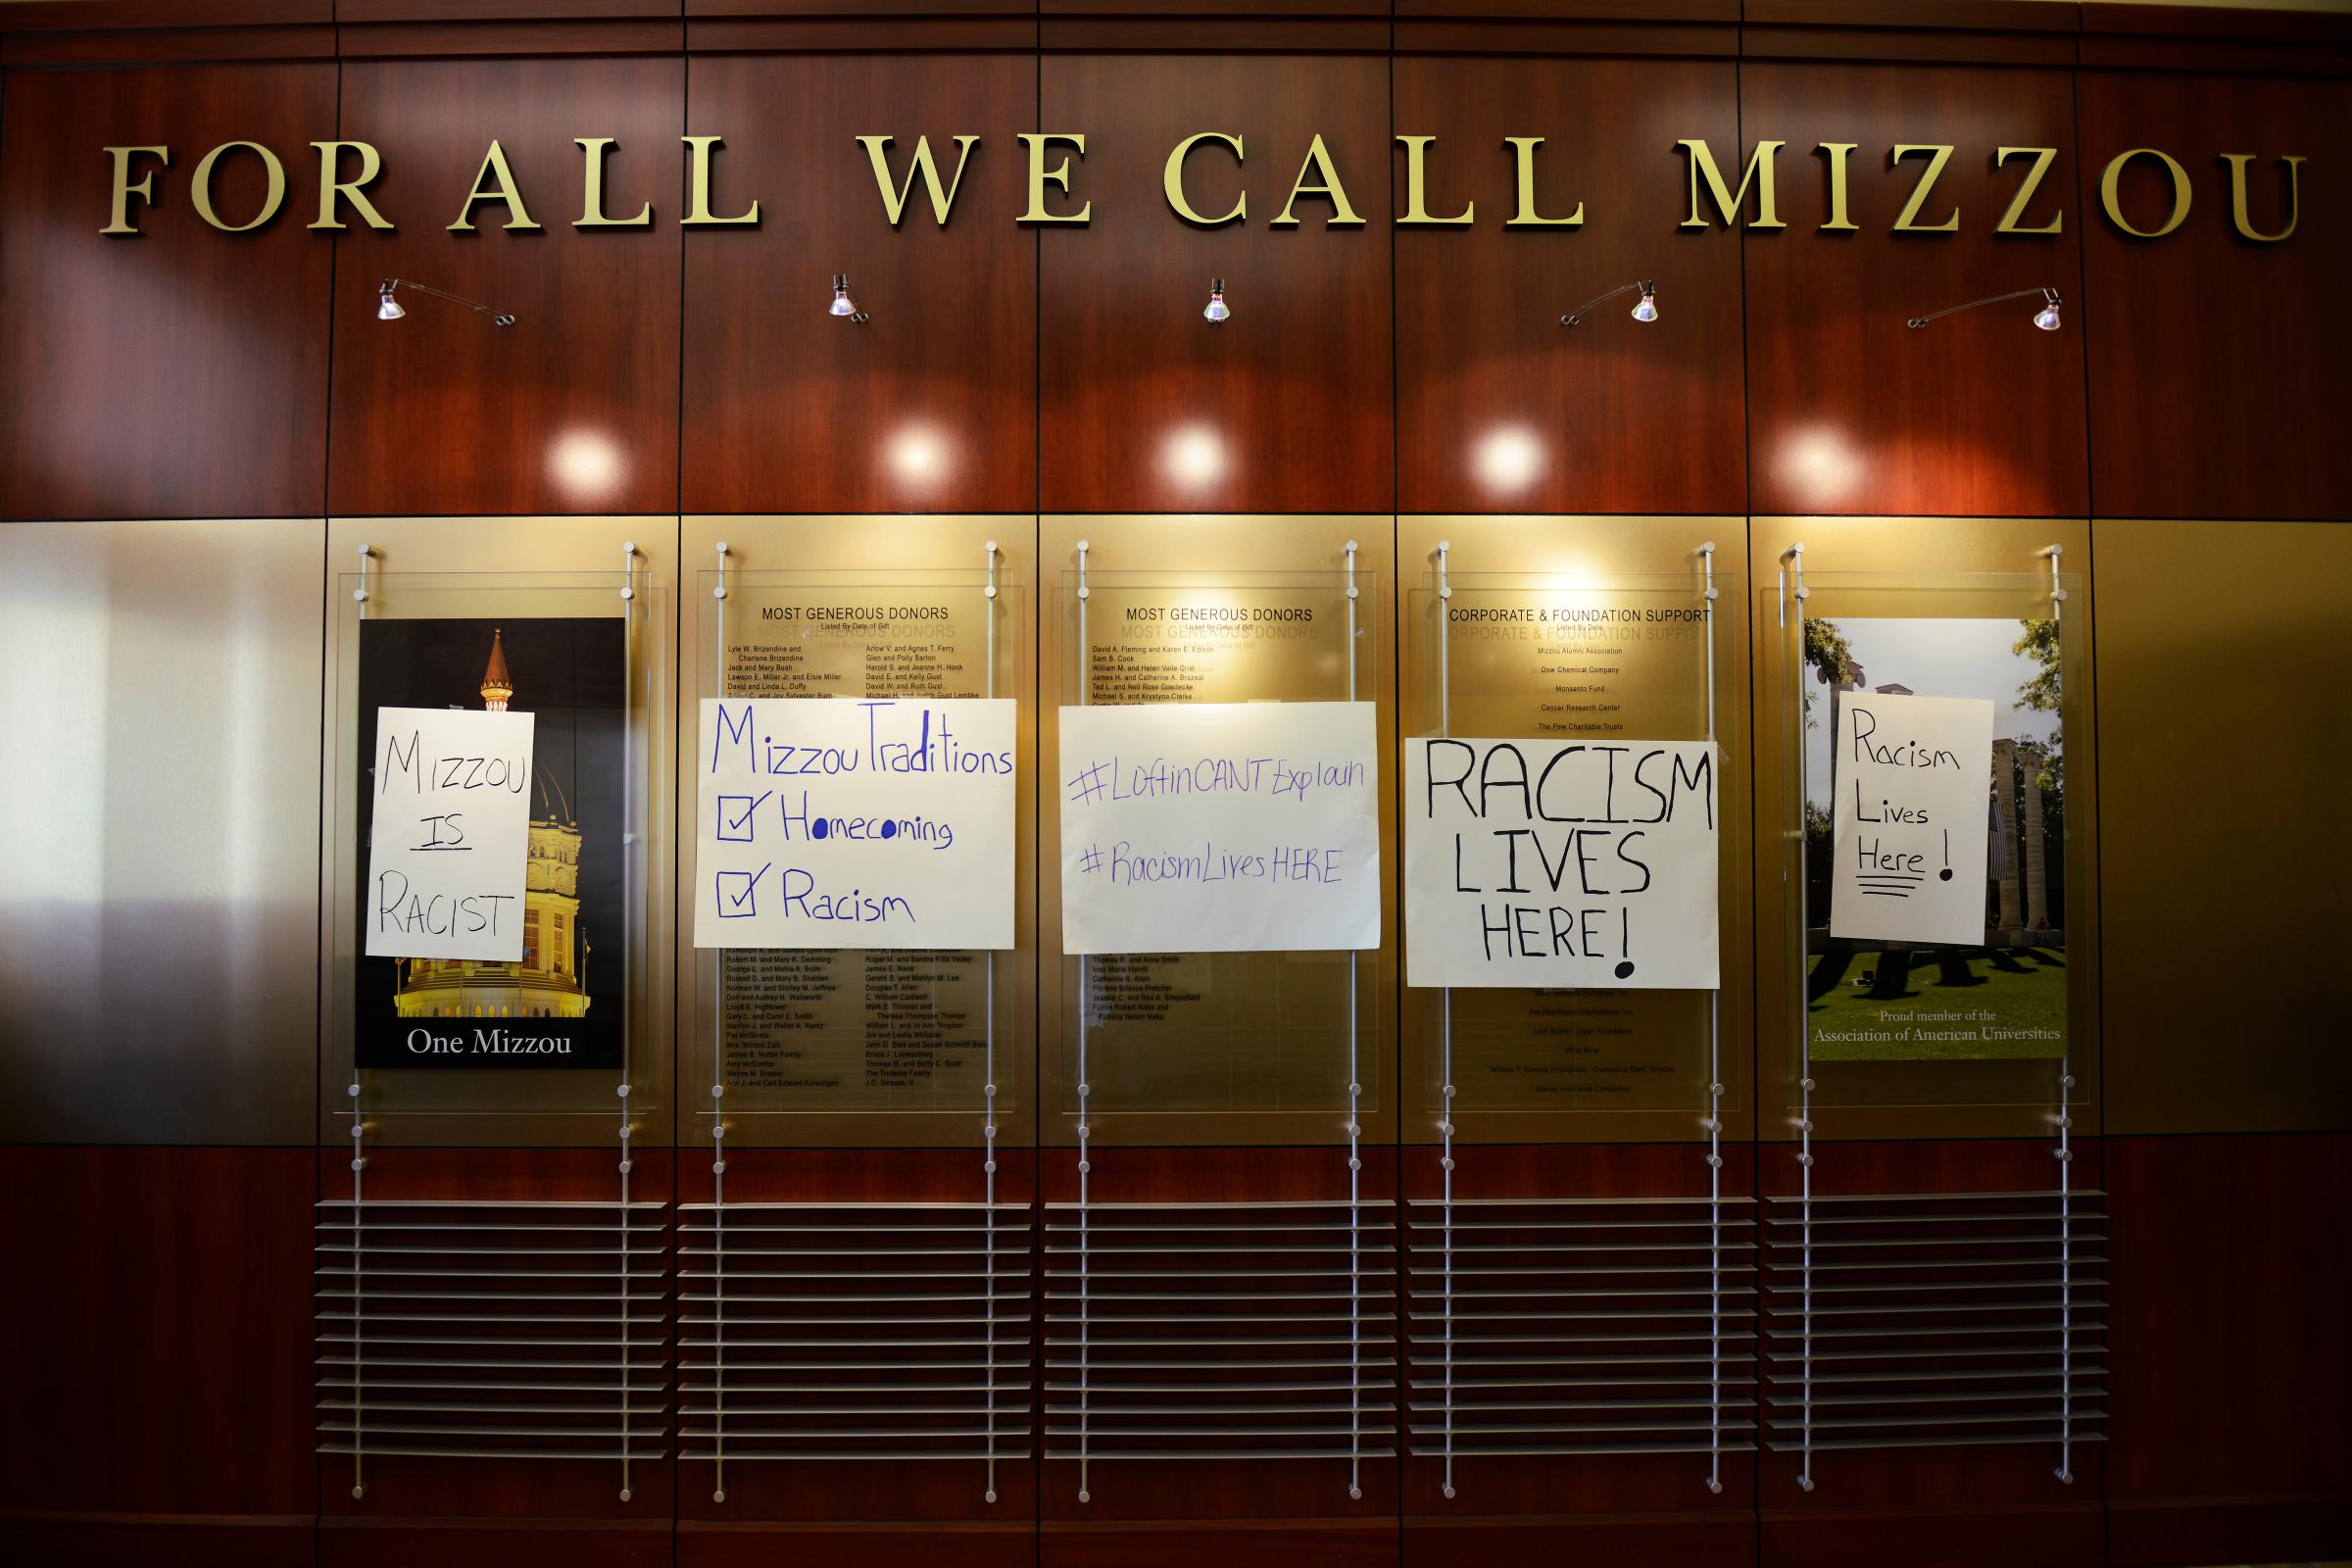 Posters from a "#RacismLivesHere" rally are displayed at Jesse Hall at the University of Missouri campus following a student march on Sept. 24, 2015 in Columbia, Mo. Students said that racism is a problem on their campus.